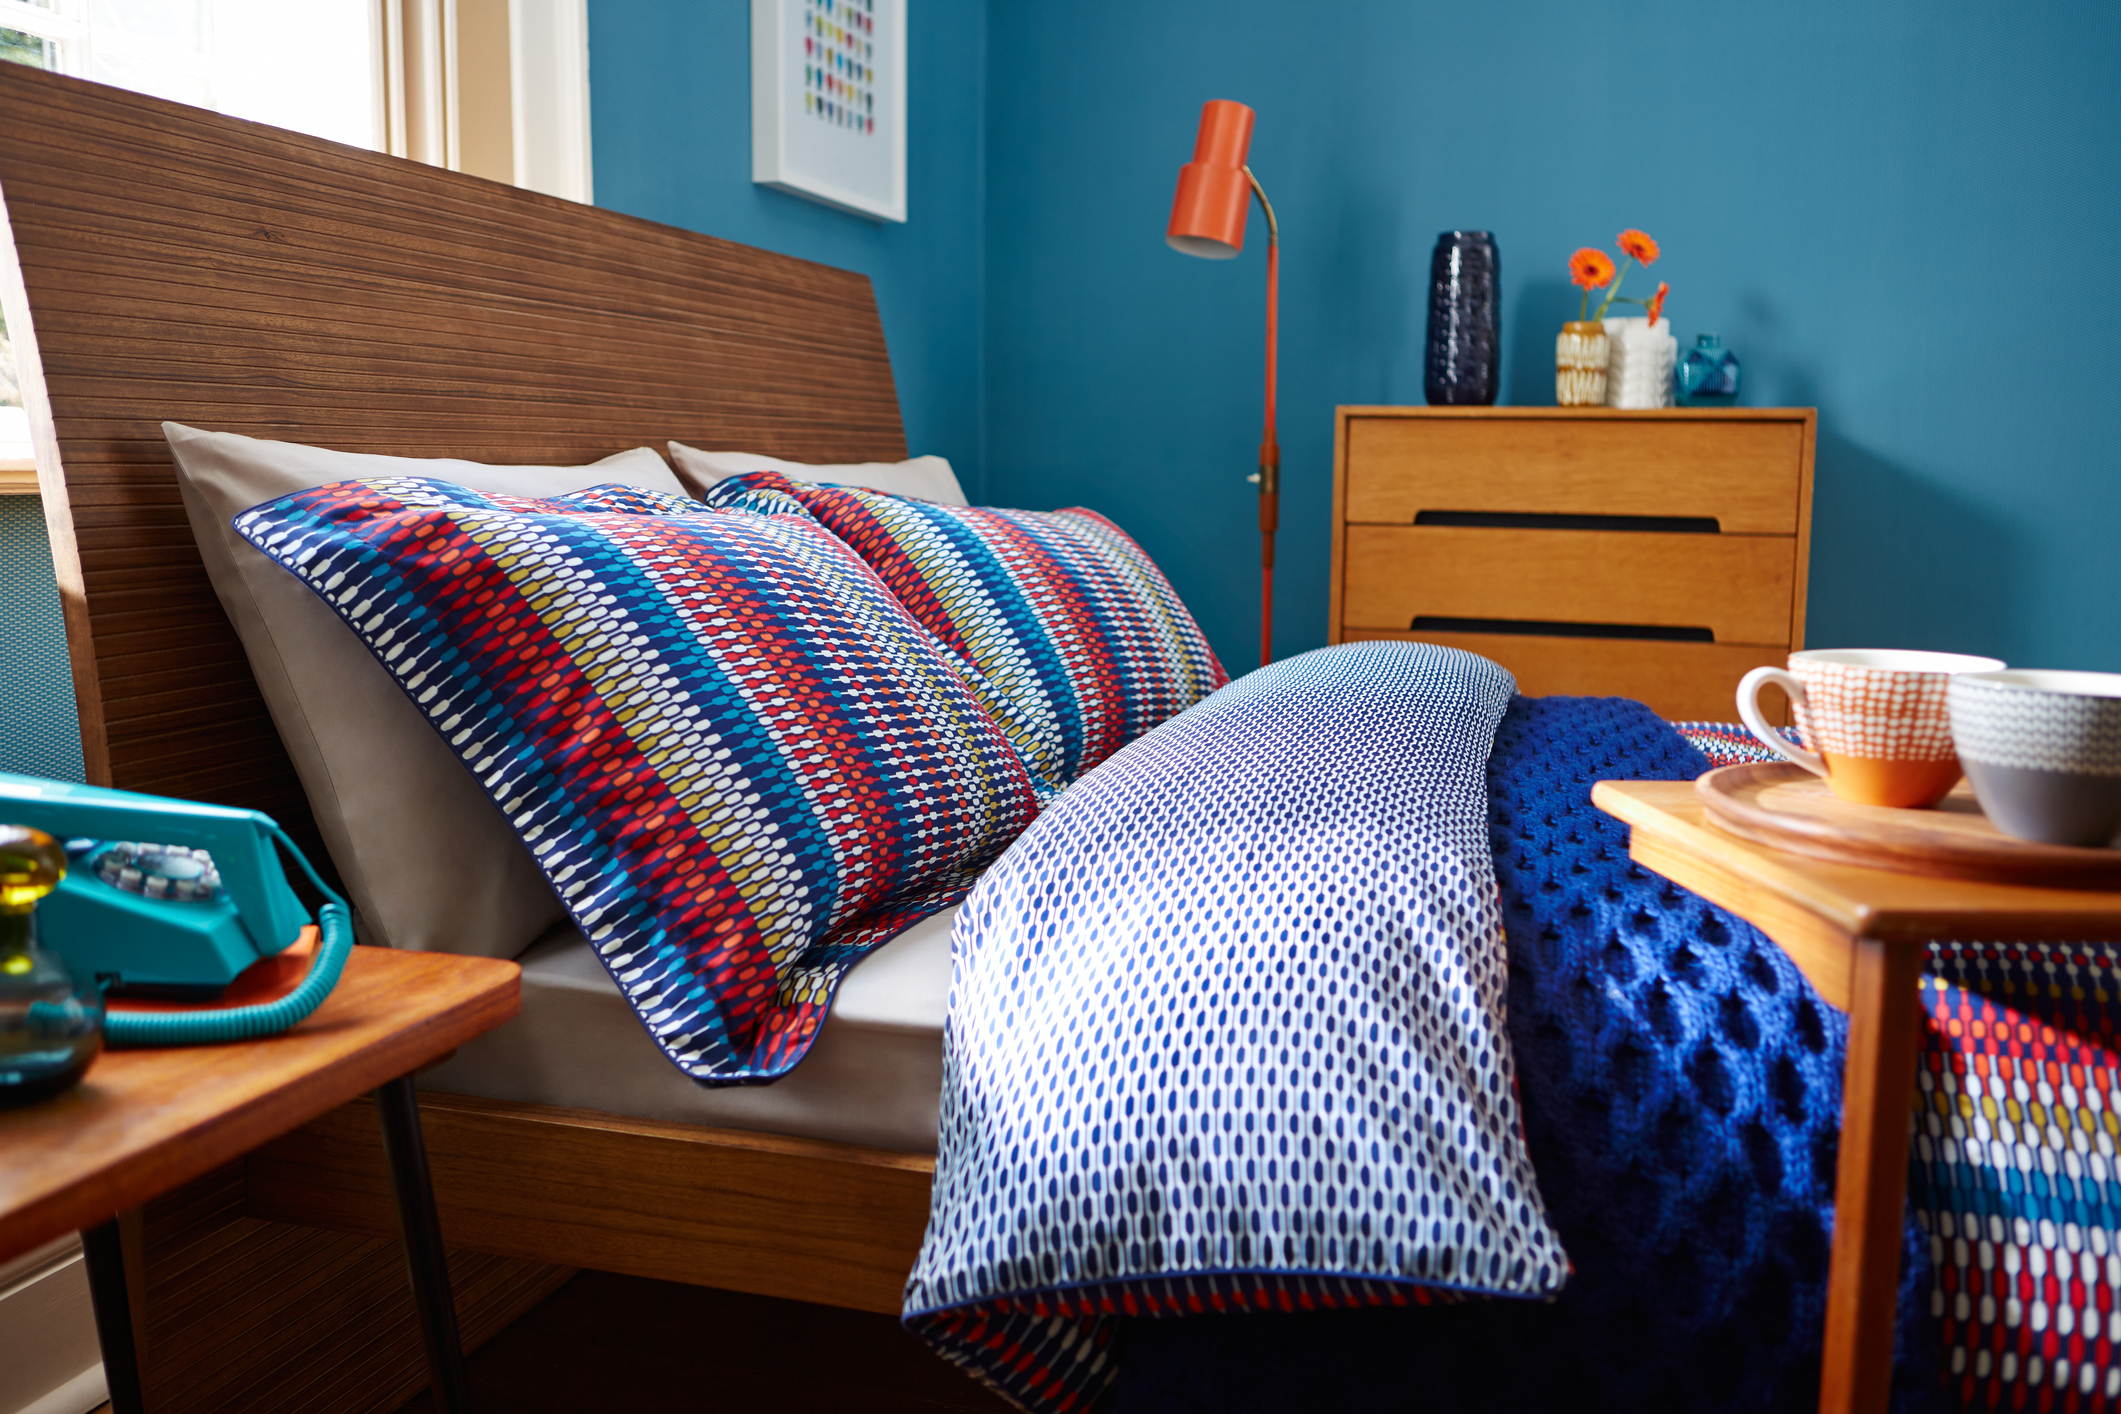 A colorful bedroom with blue walls, an orange lamp, and multicolored pillows and bedspread.